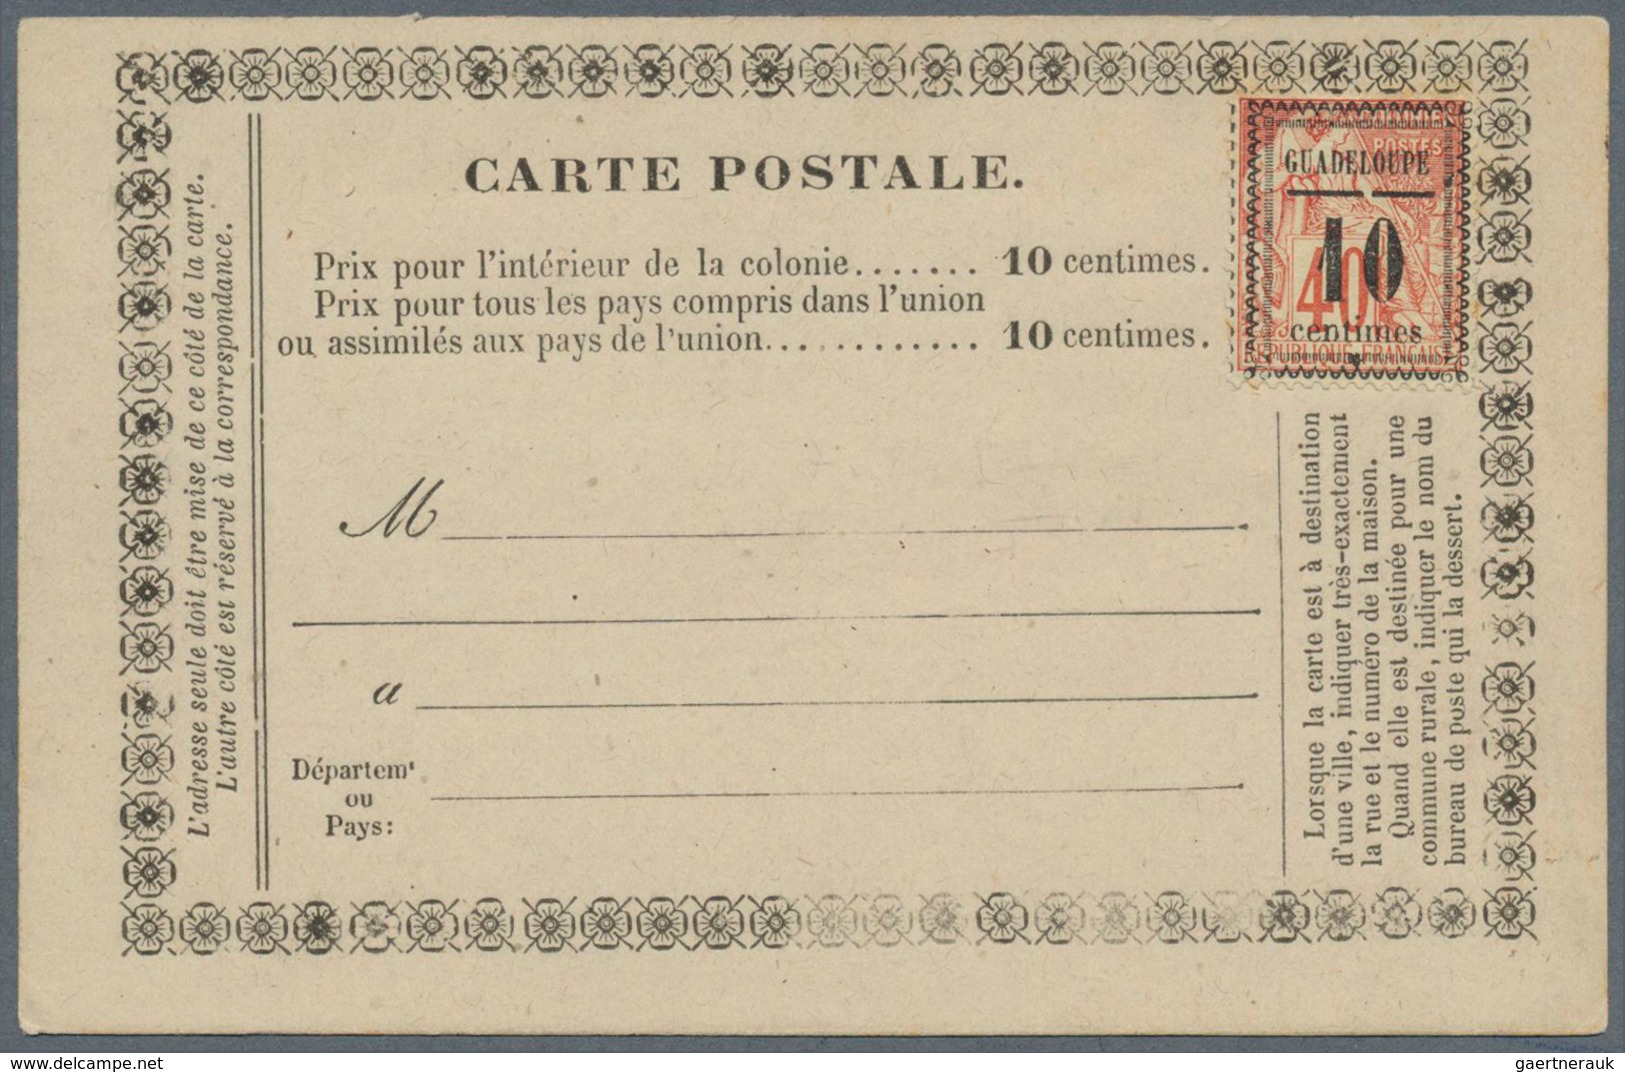 Guadeloupe: 1837/1913, collection of apprx. 90 entires from a nice selection of pre-philatelic/stamp